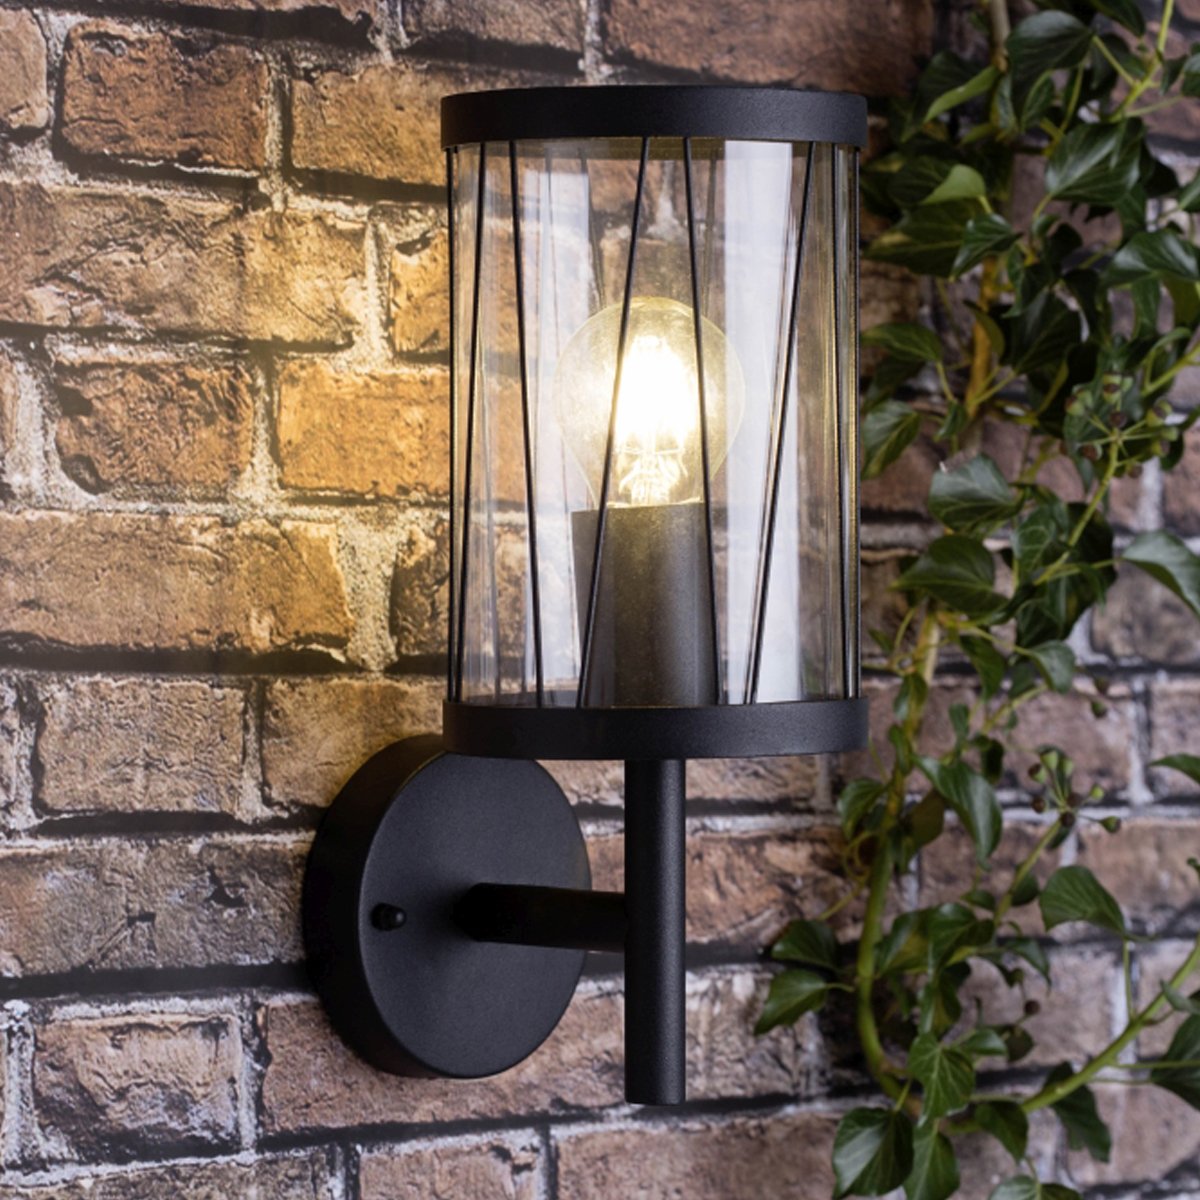 This wall light features a clear glass diffuser with a diagonal decorative pattern. It is an elegant wall light that blends well with both modern and traditional architecture. The simple, modern design of this light is suitable for outdoor areas such as front/back doors, driveways, gardens, patios, porches or garages.